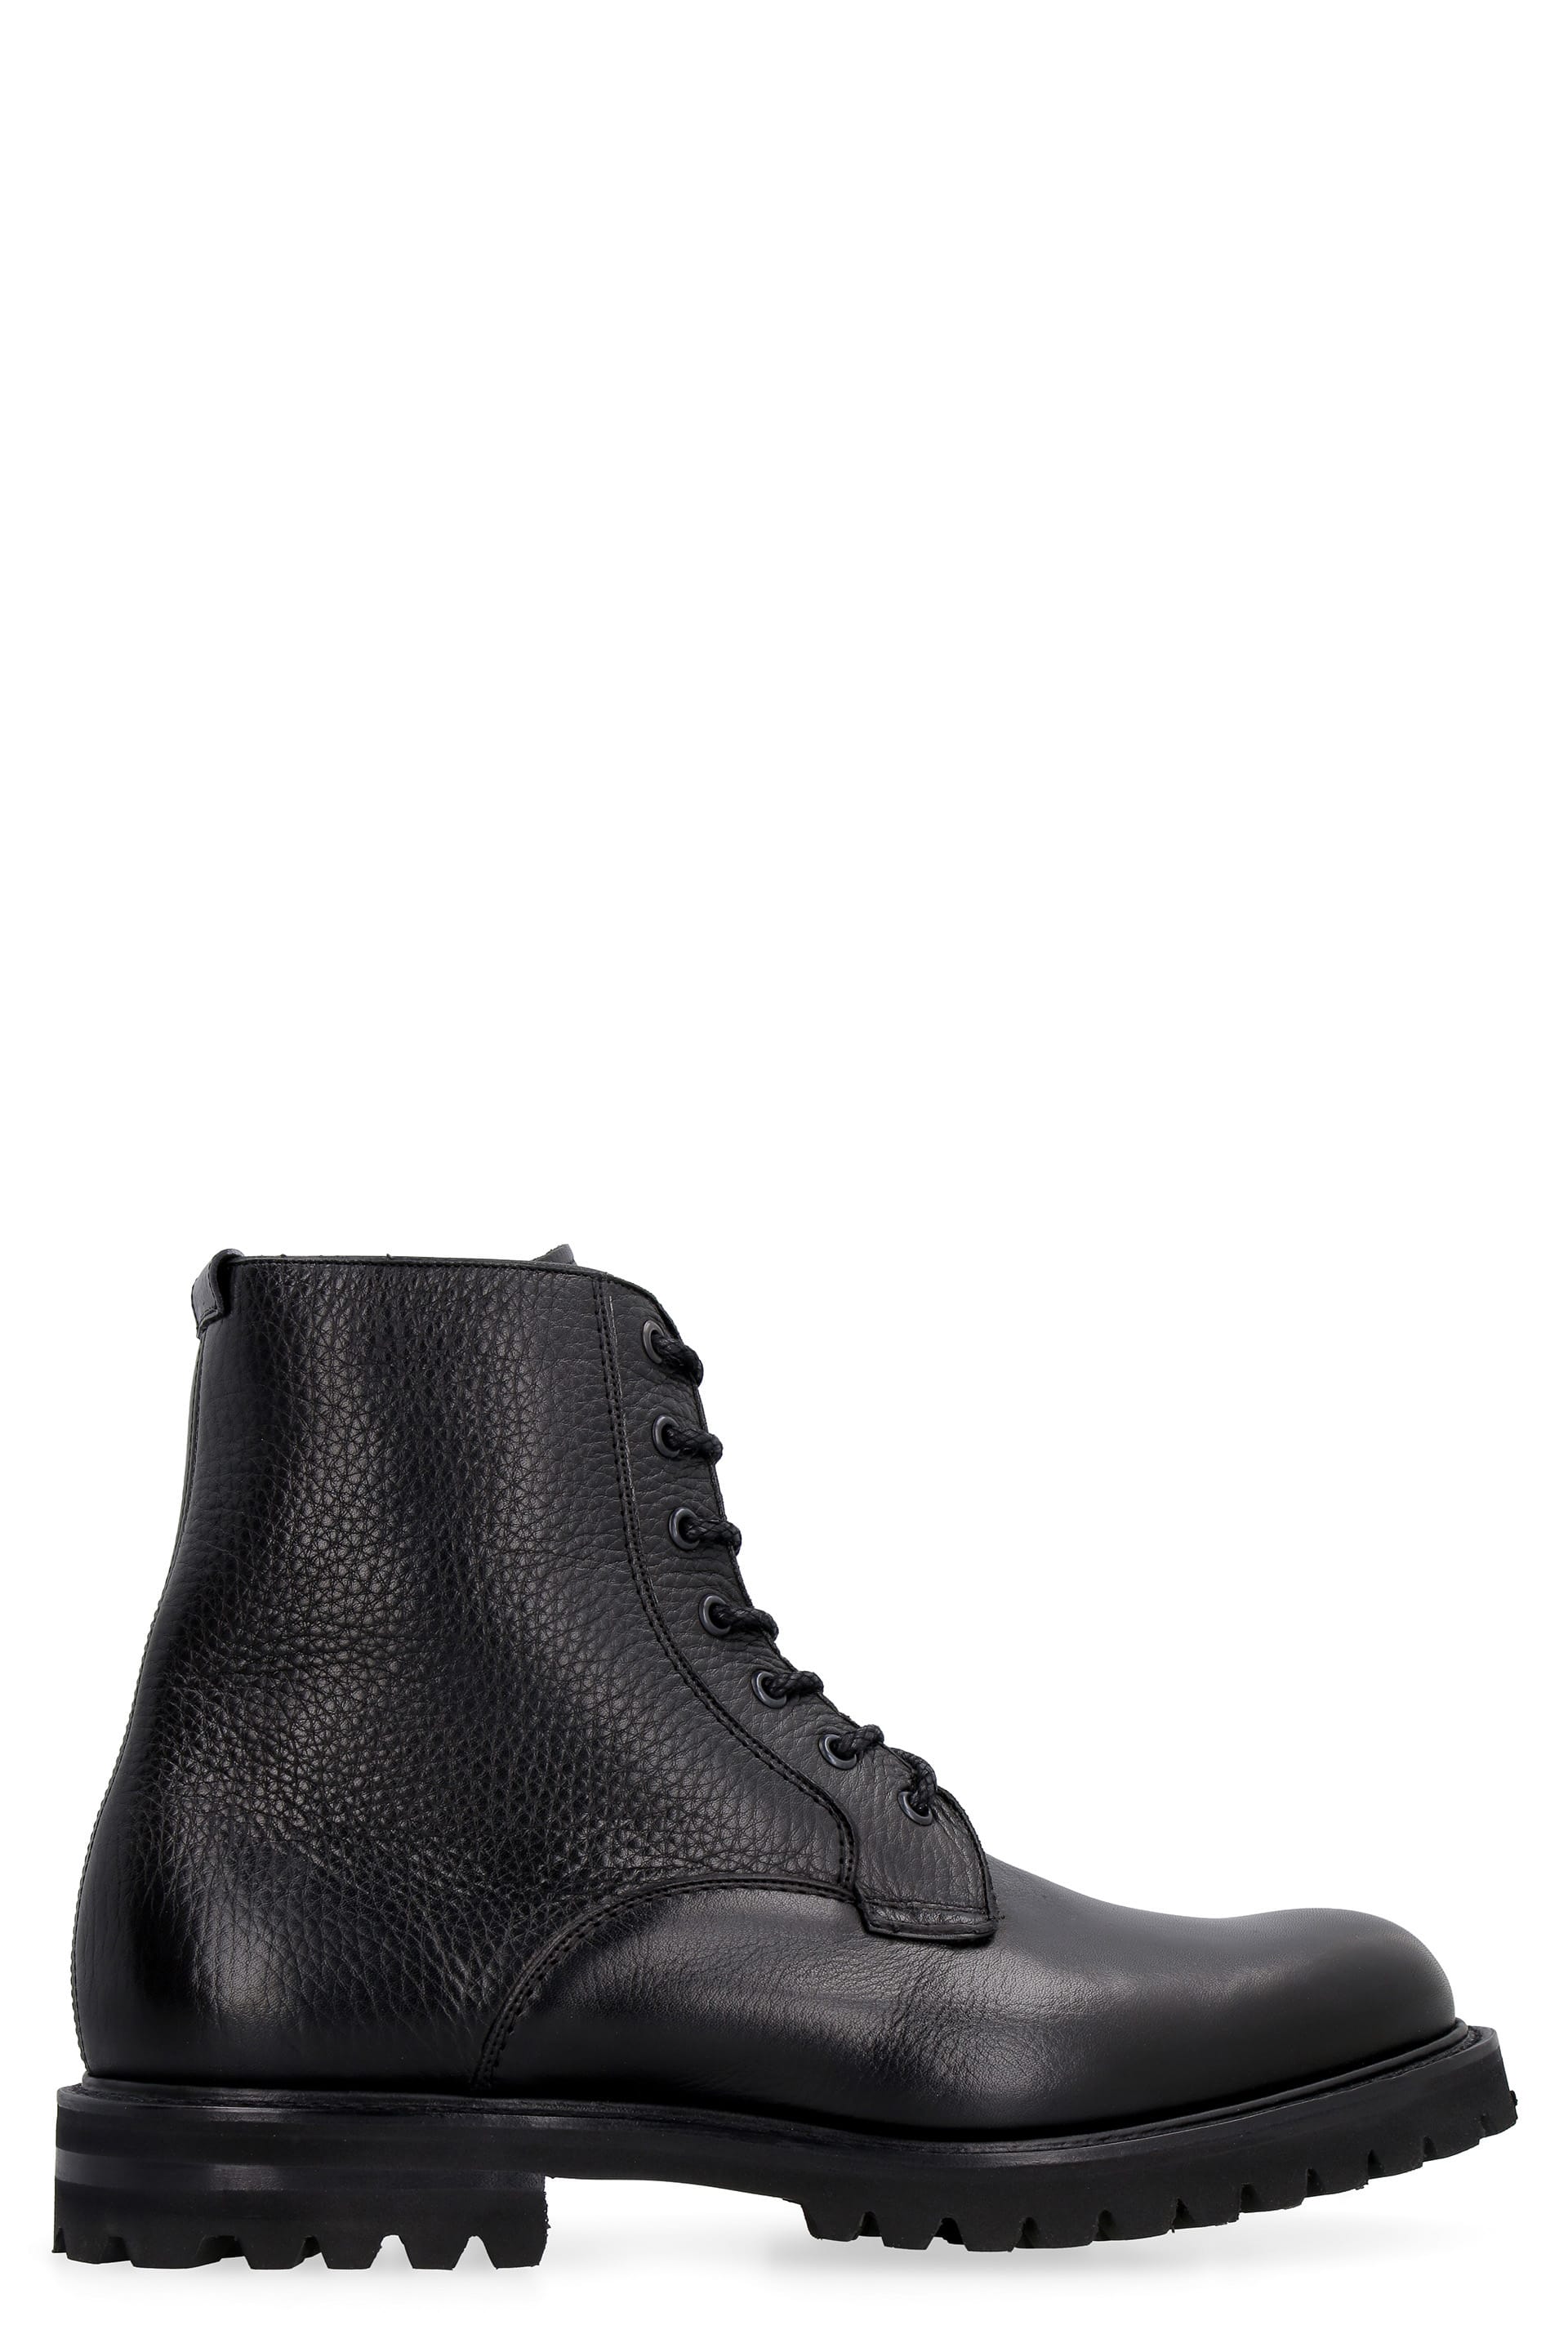 At vinder Som regel Church's Coalport 2 Leather Lace-up Boots | italist, ALWAYS LIKE A SALE